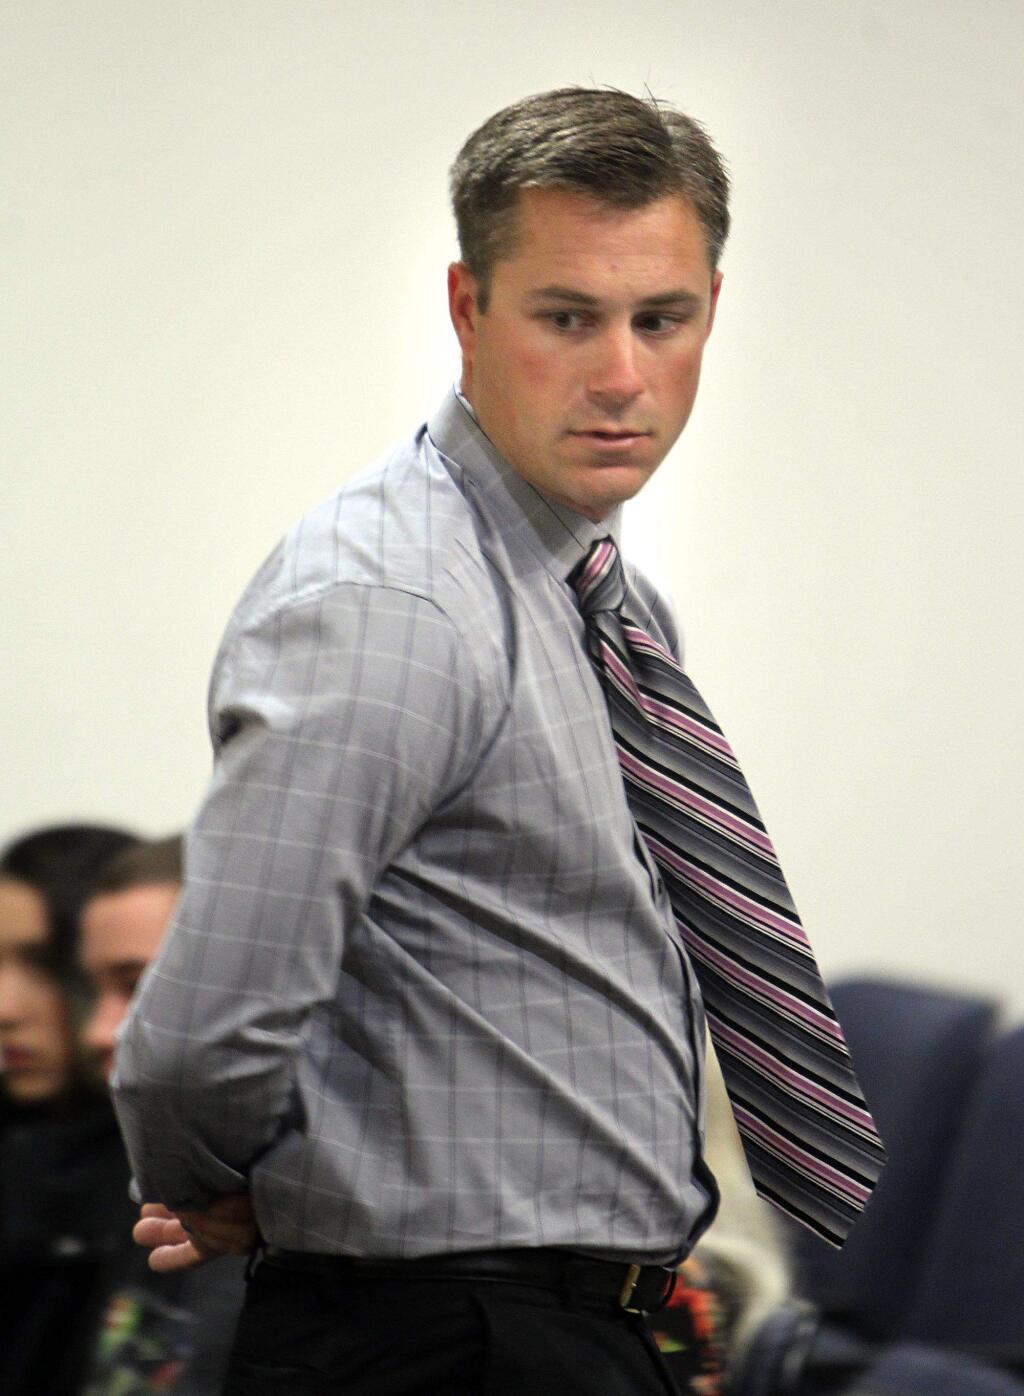 Nicholas Tognozzi is shown during a March appearance in Sonoma County Superior Court. In September, Tognozzi was sentenced to a year in jail for a Highway 12 crash that killed two women. (JOHN BURGESS/ PD FILE)